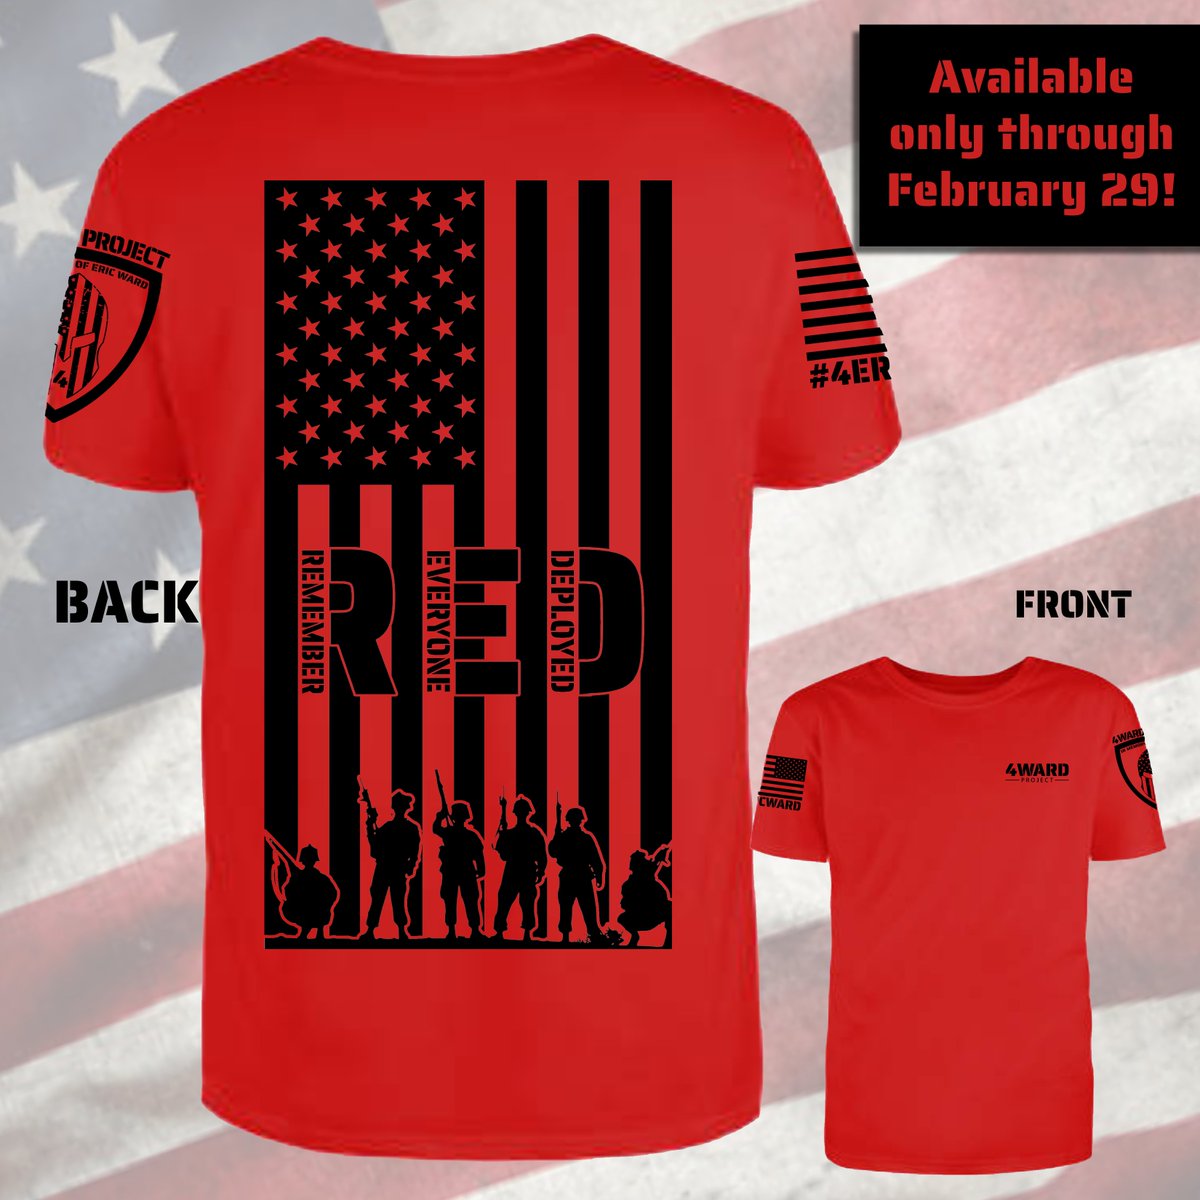 Red Fridays are to support troops that are deployed! Limited T-Shirt/Hoodie of the Month: Remember Everyone Deployed - only available until Feb 29 at 4WARDproject.com/store.html. Our mission is to honor our son, Eric Ward, who was lost to military suicide on 8/22/16 and #end22aday.